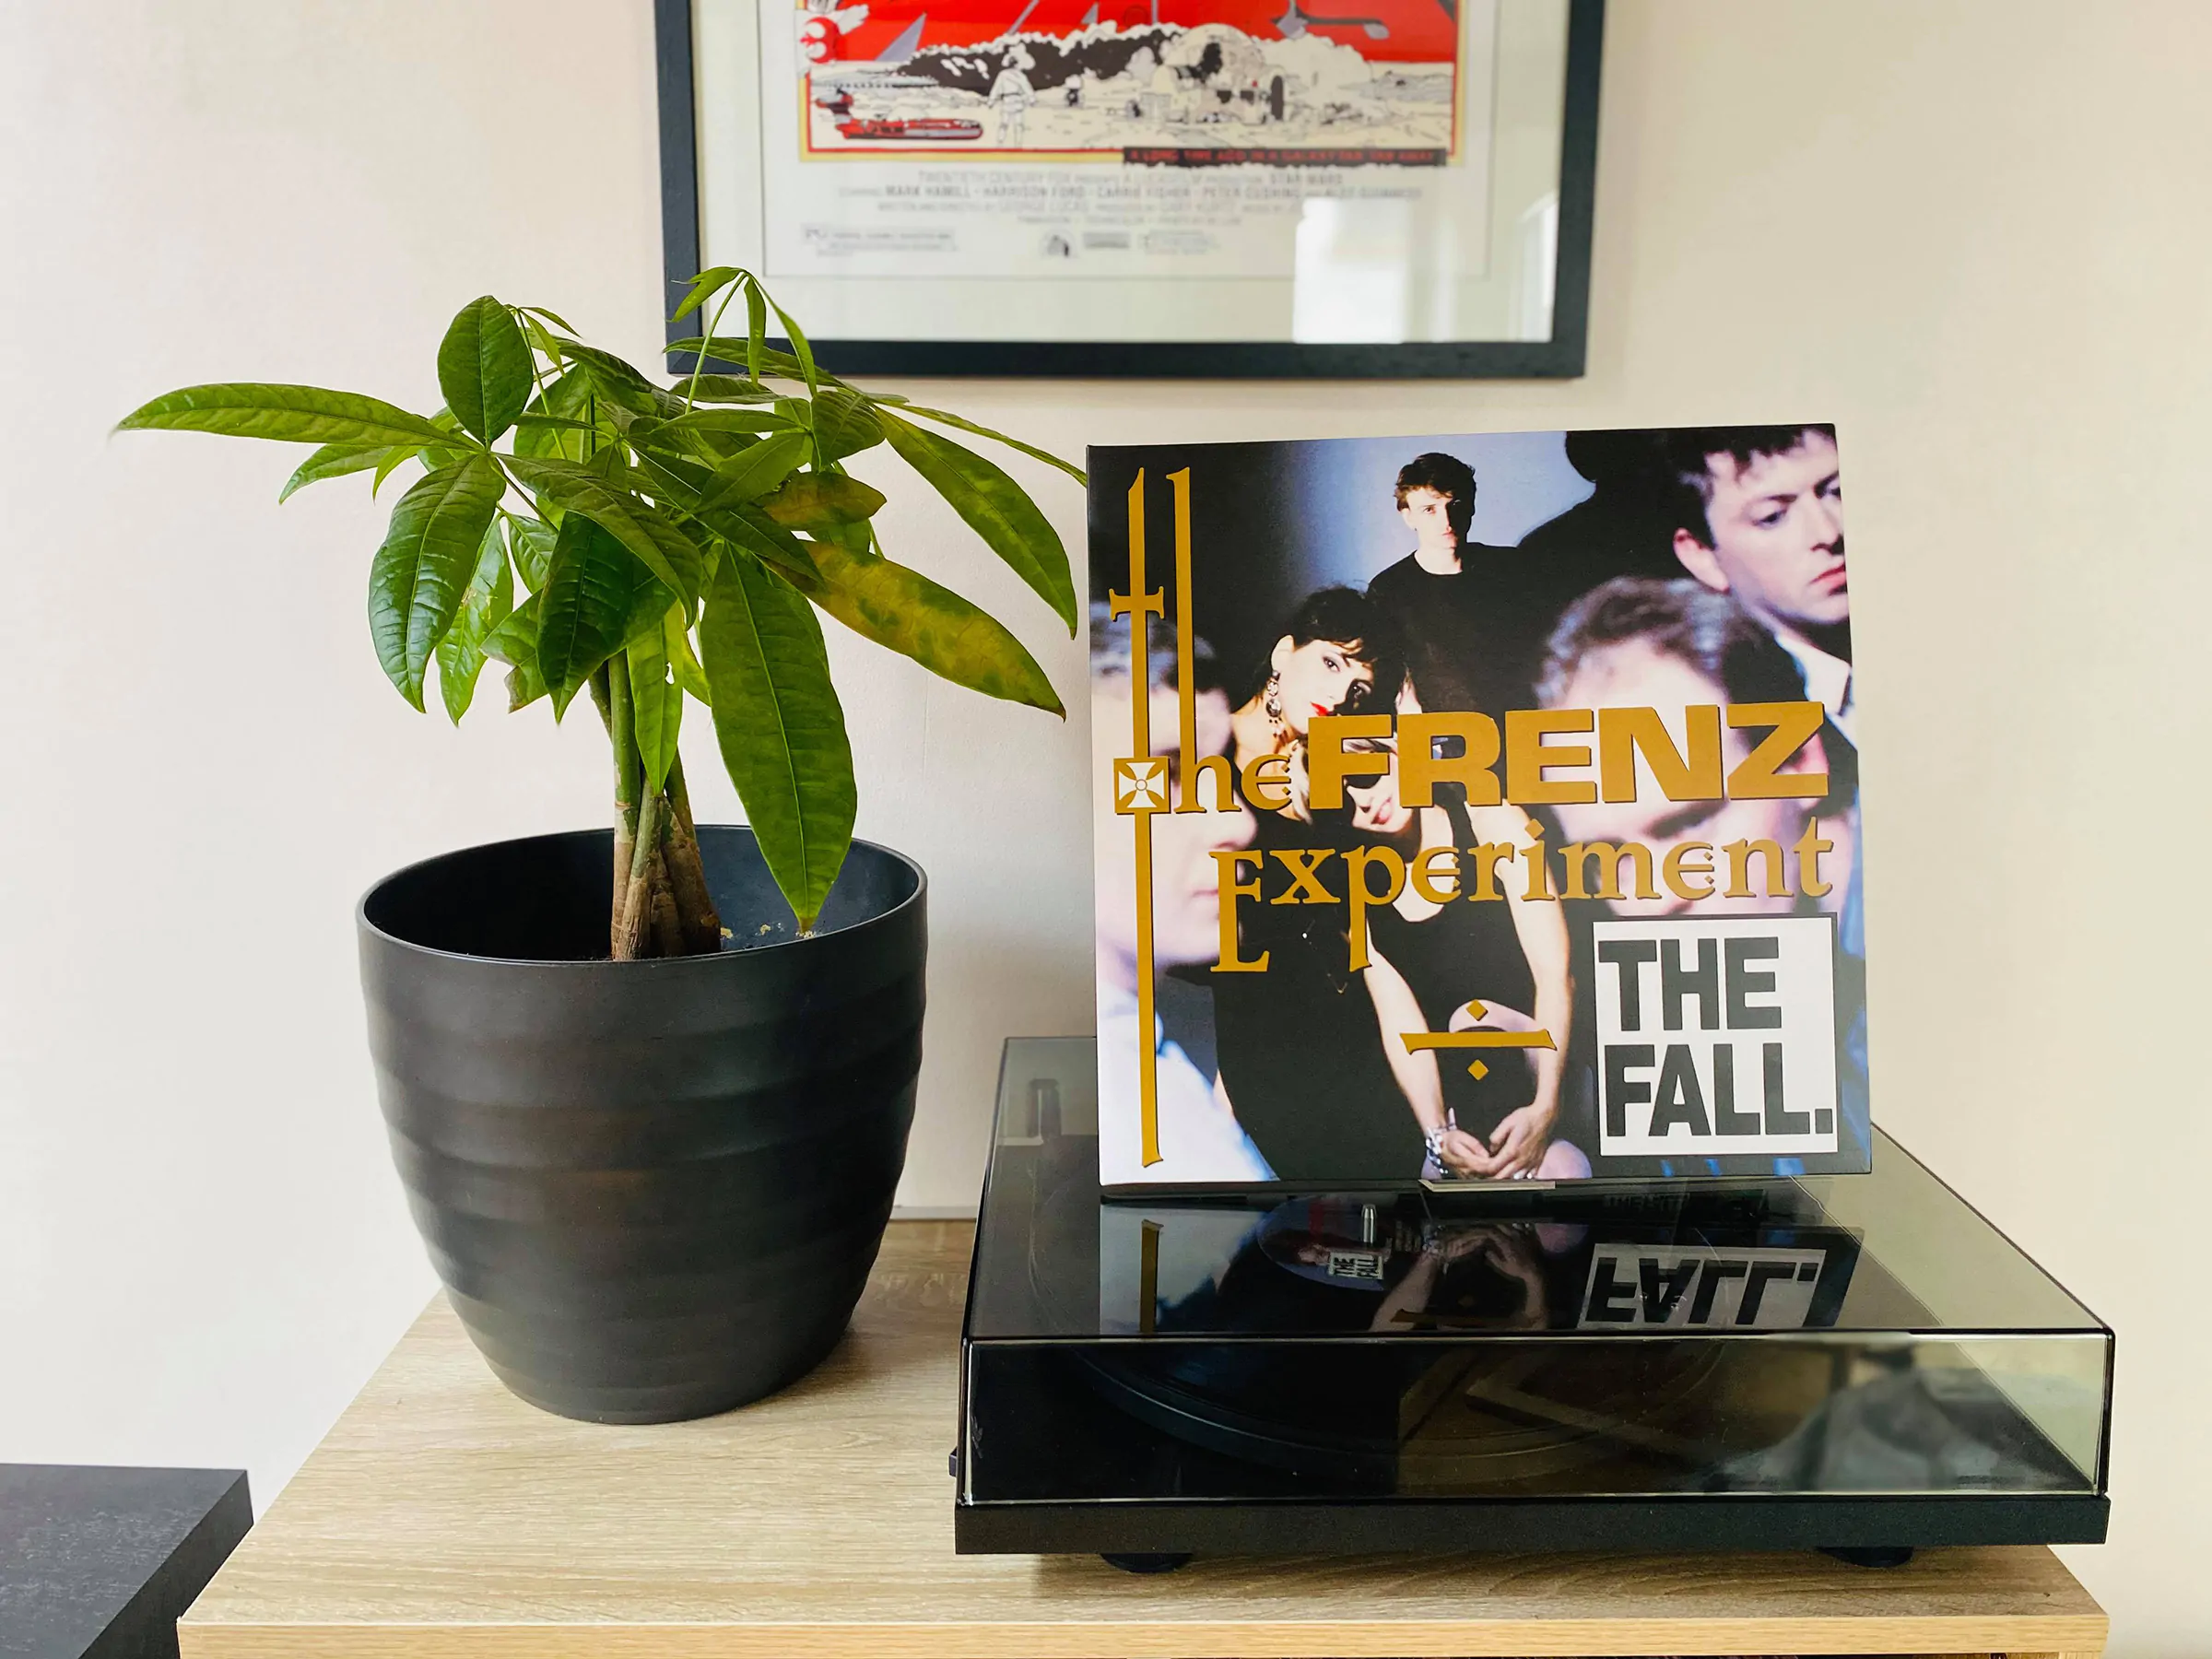 ON THE TURNTABLE: The Fall – The Frenz Experiment